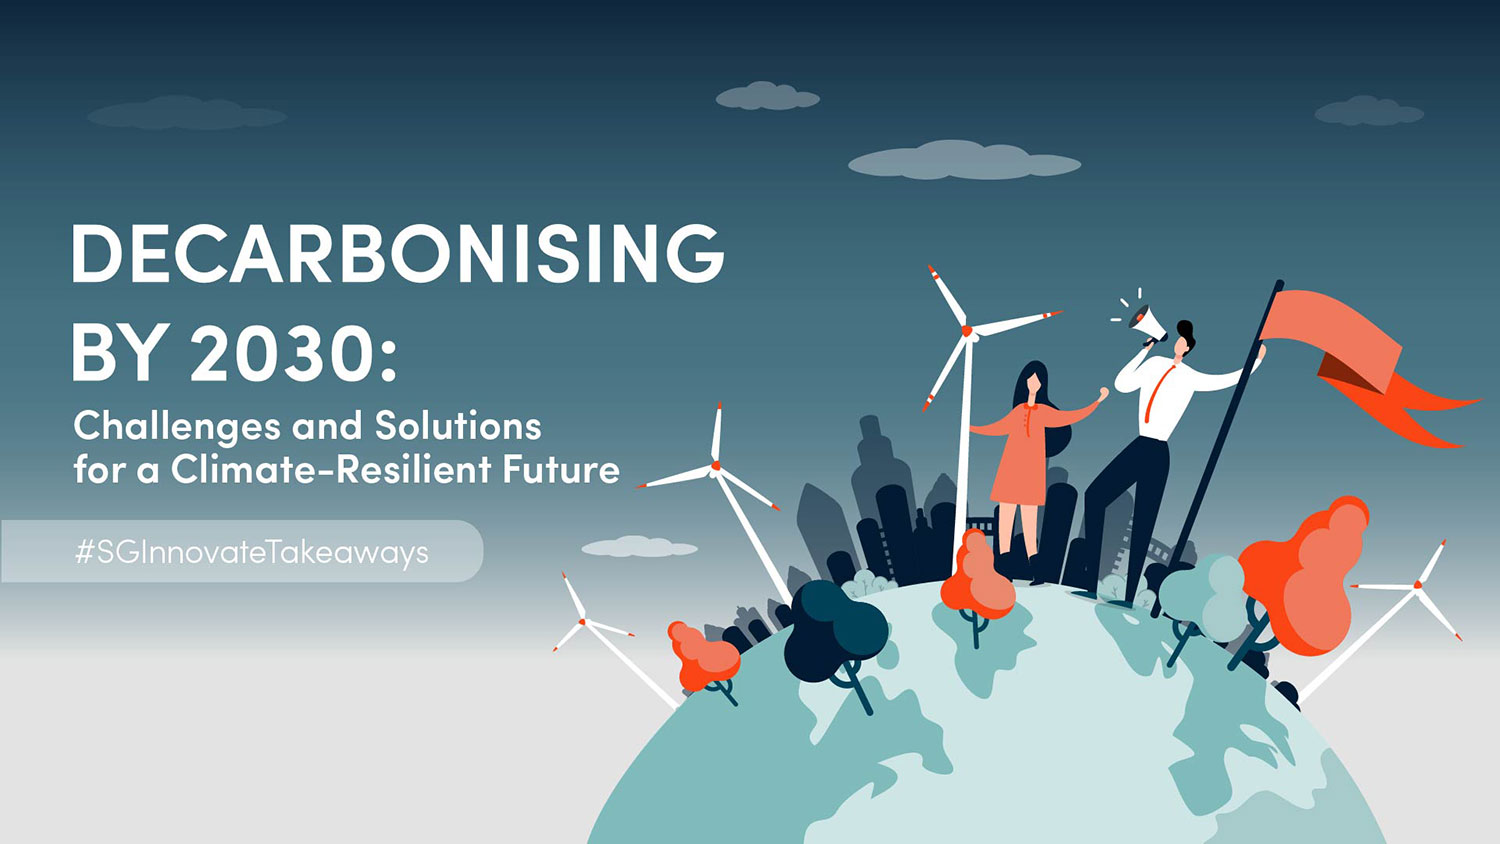 Decarbonising by 2030: Challenges and Solutions for a Climate-Resilient Future